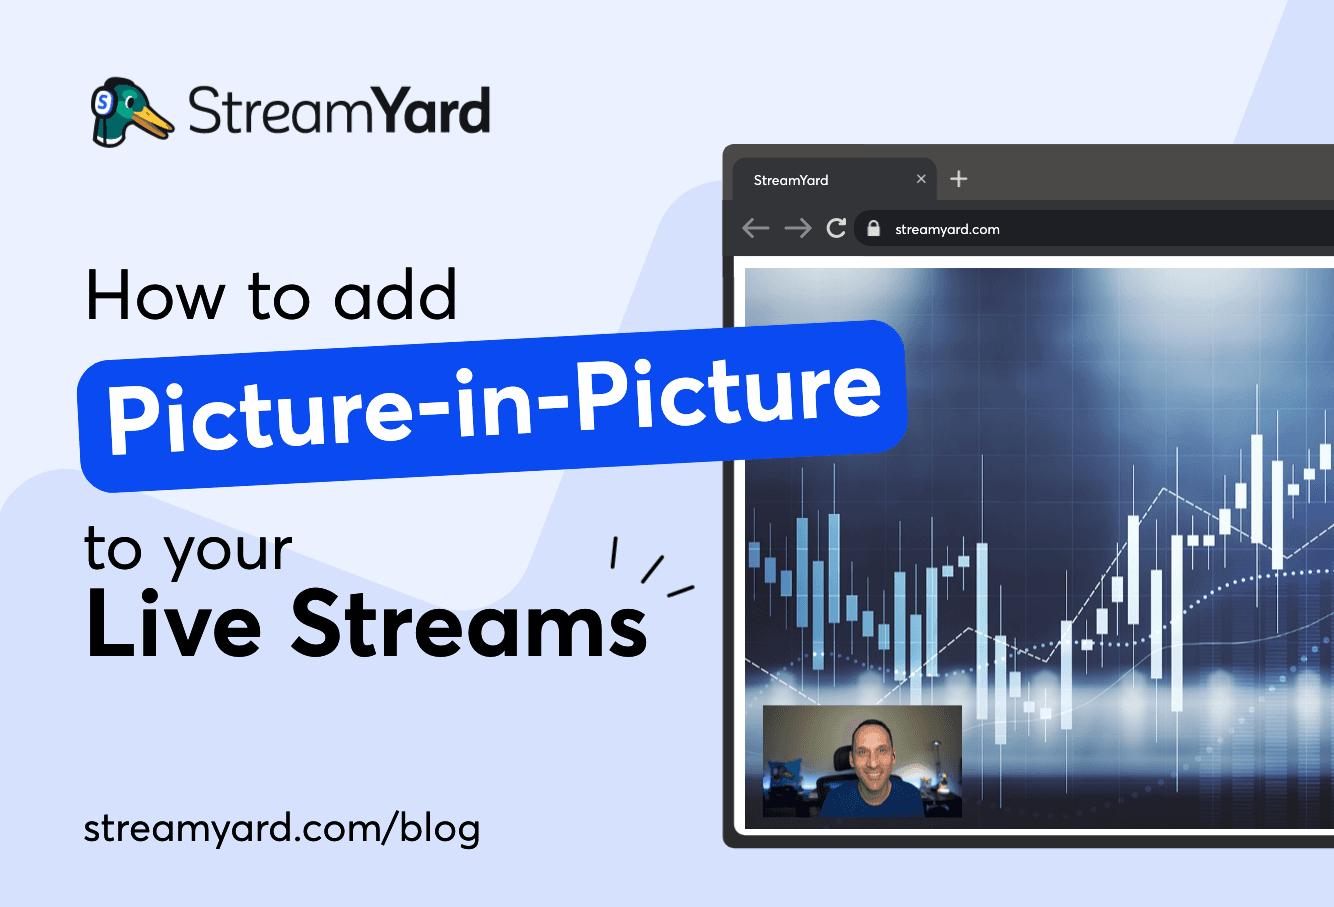 Enhance your broadcasts by adding picture-in-picture in your live streams using StreamYard. Here’s a quick guide on how to do that.